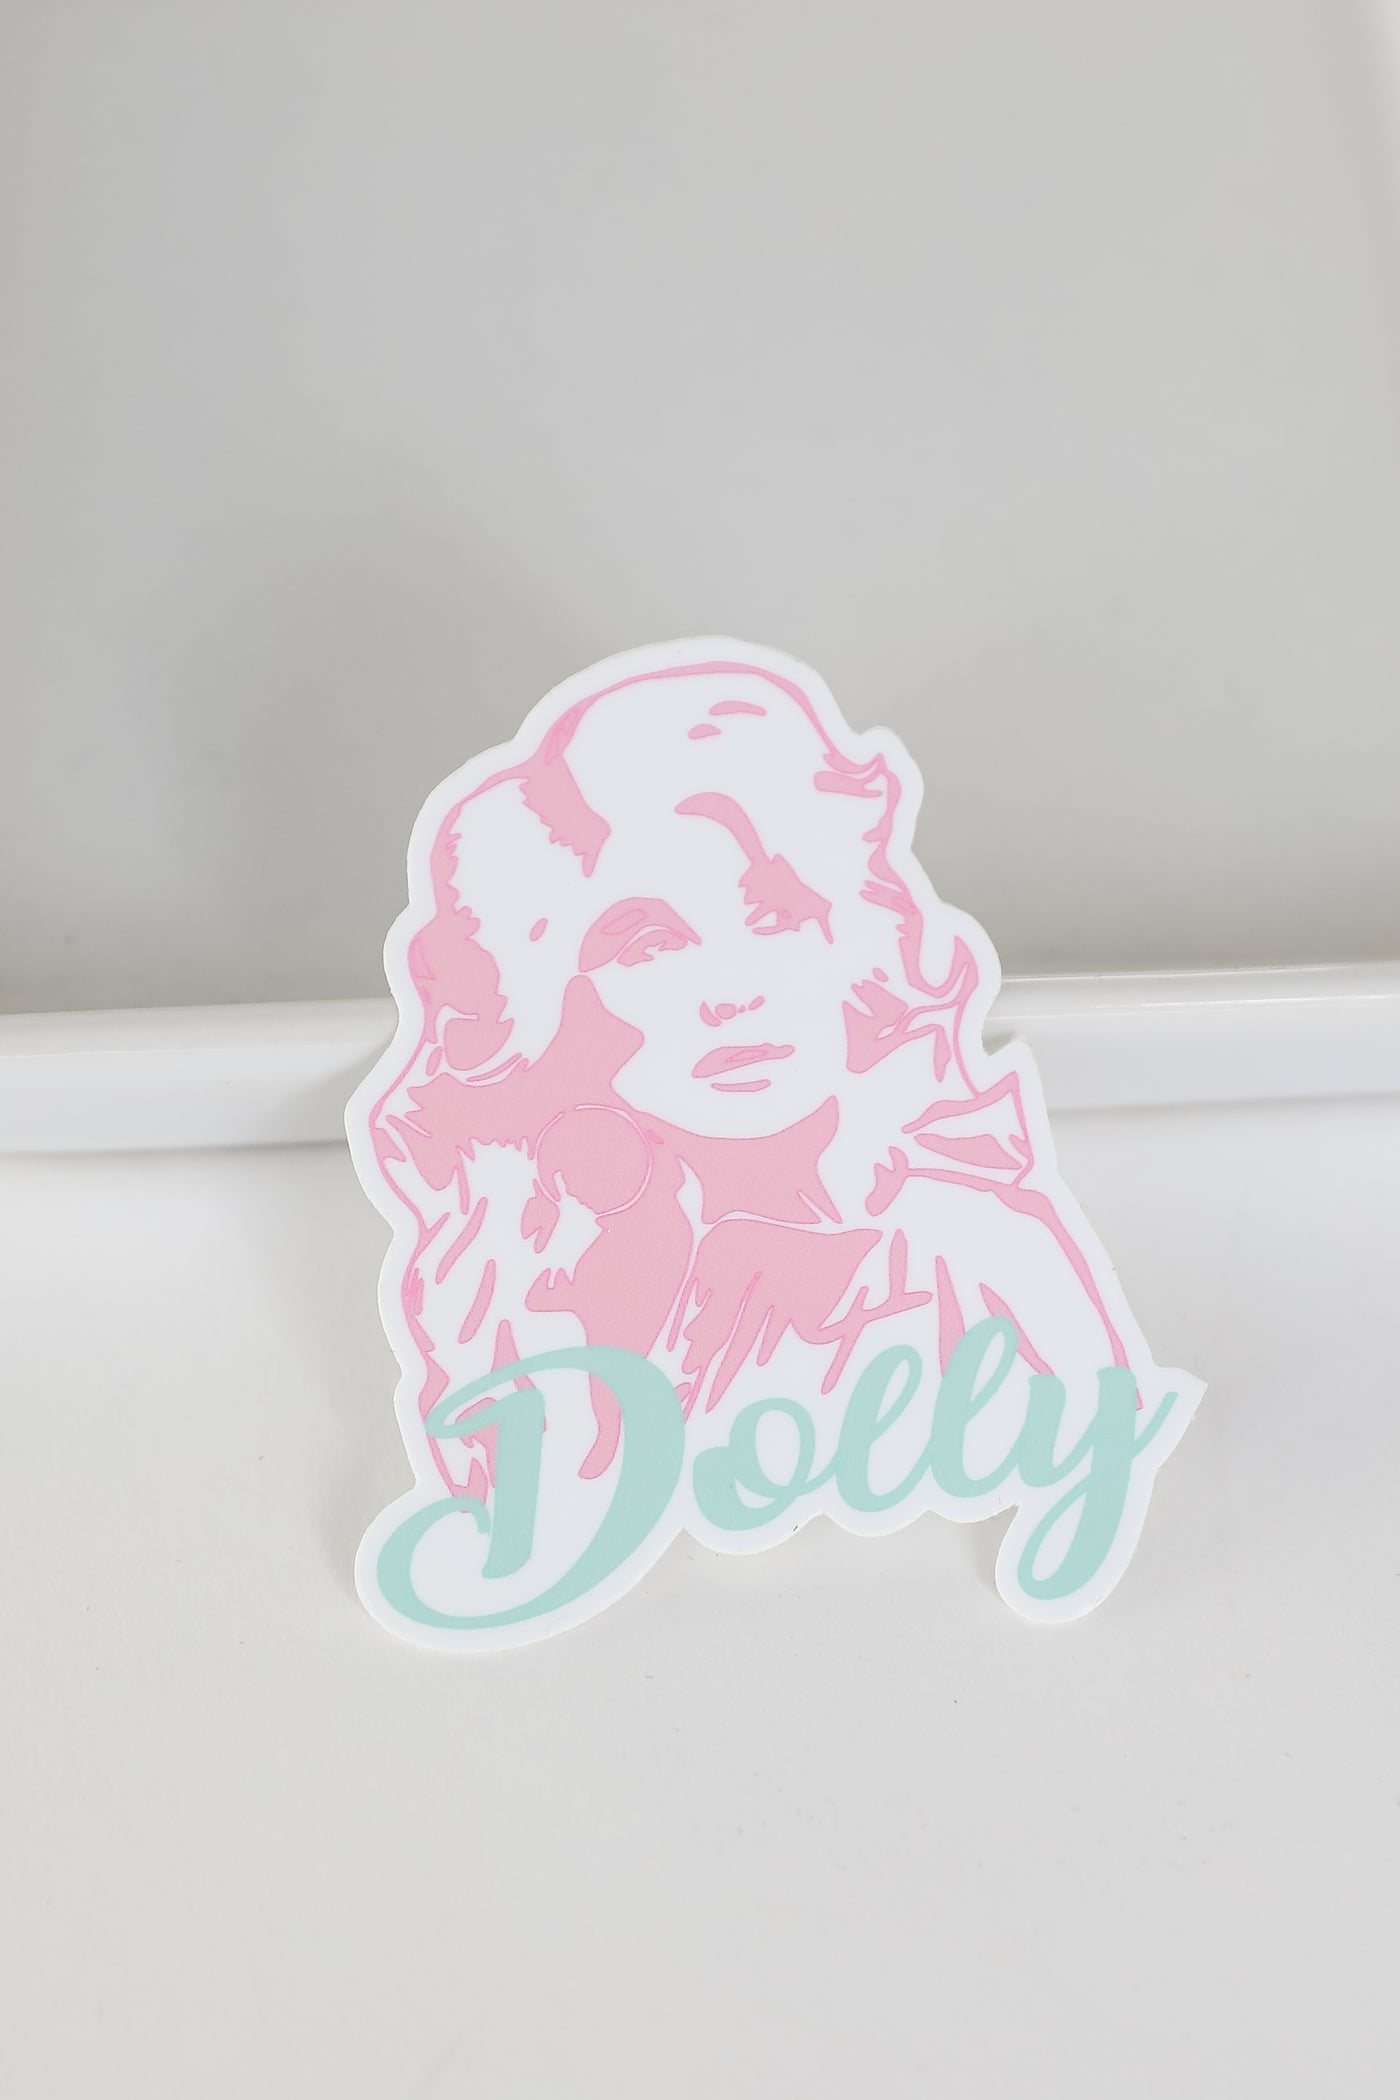 Dolly Parton Sticker from dress up